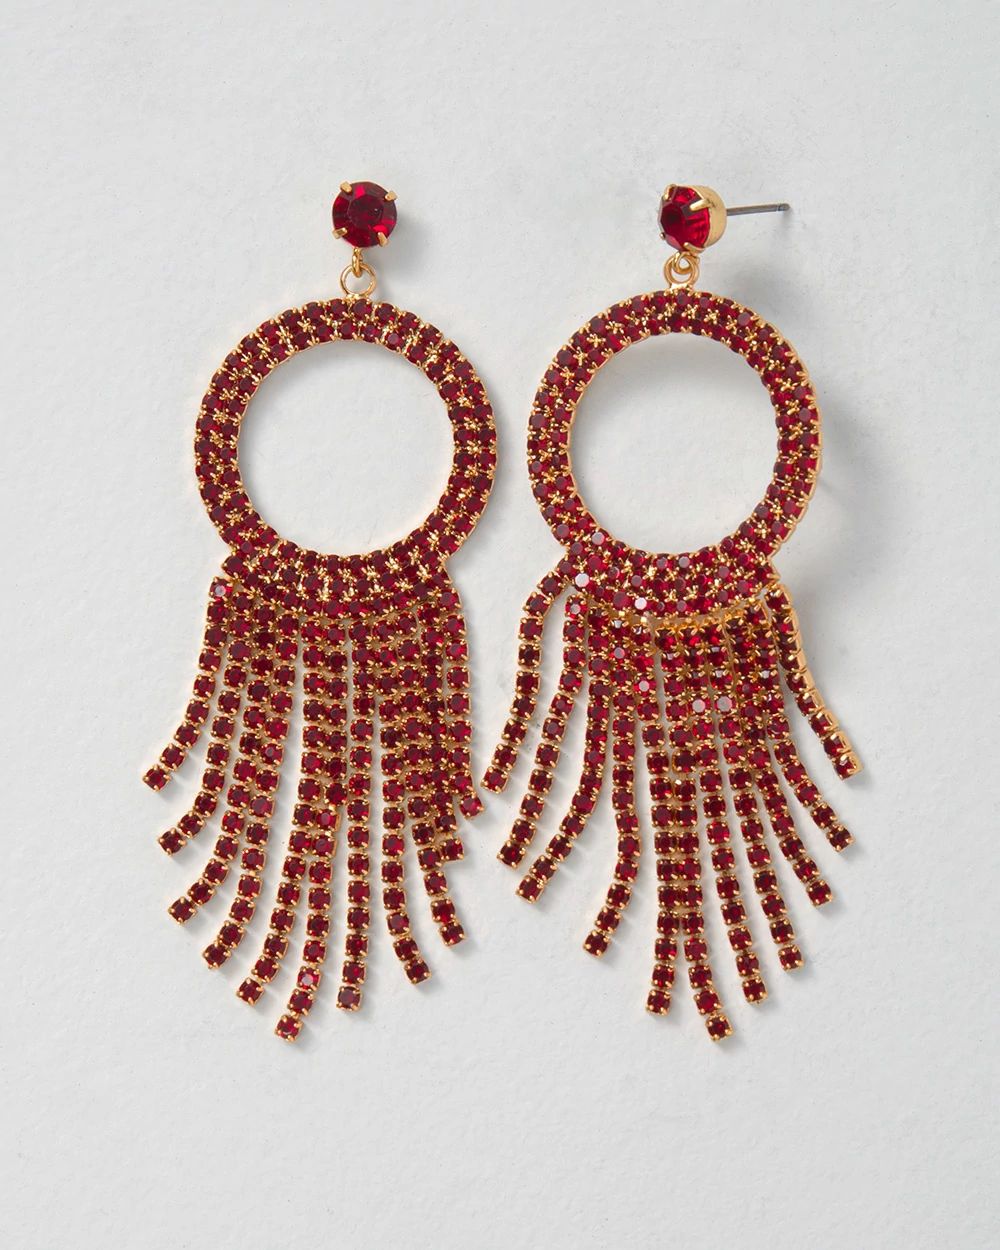 Red & Gold Fringe Hoop Earrings click to view larger image.